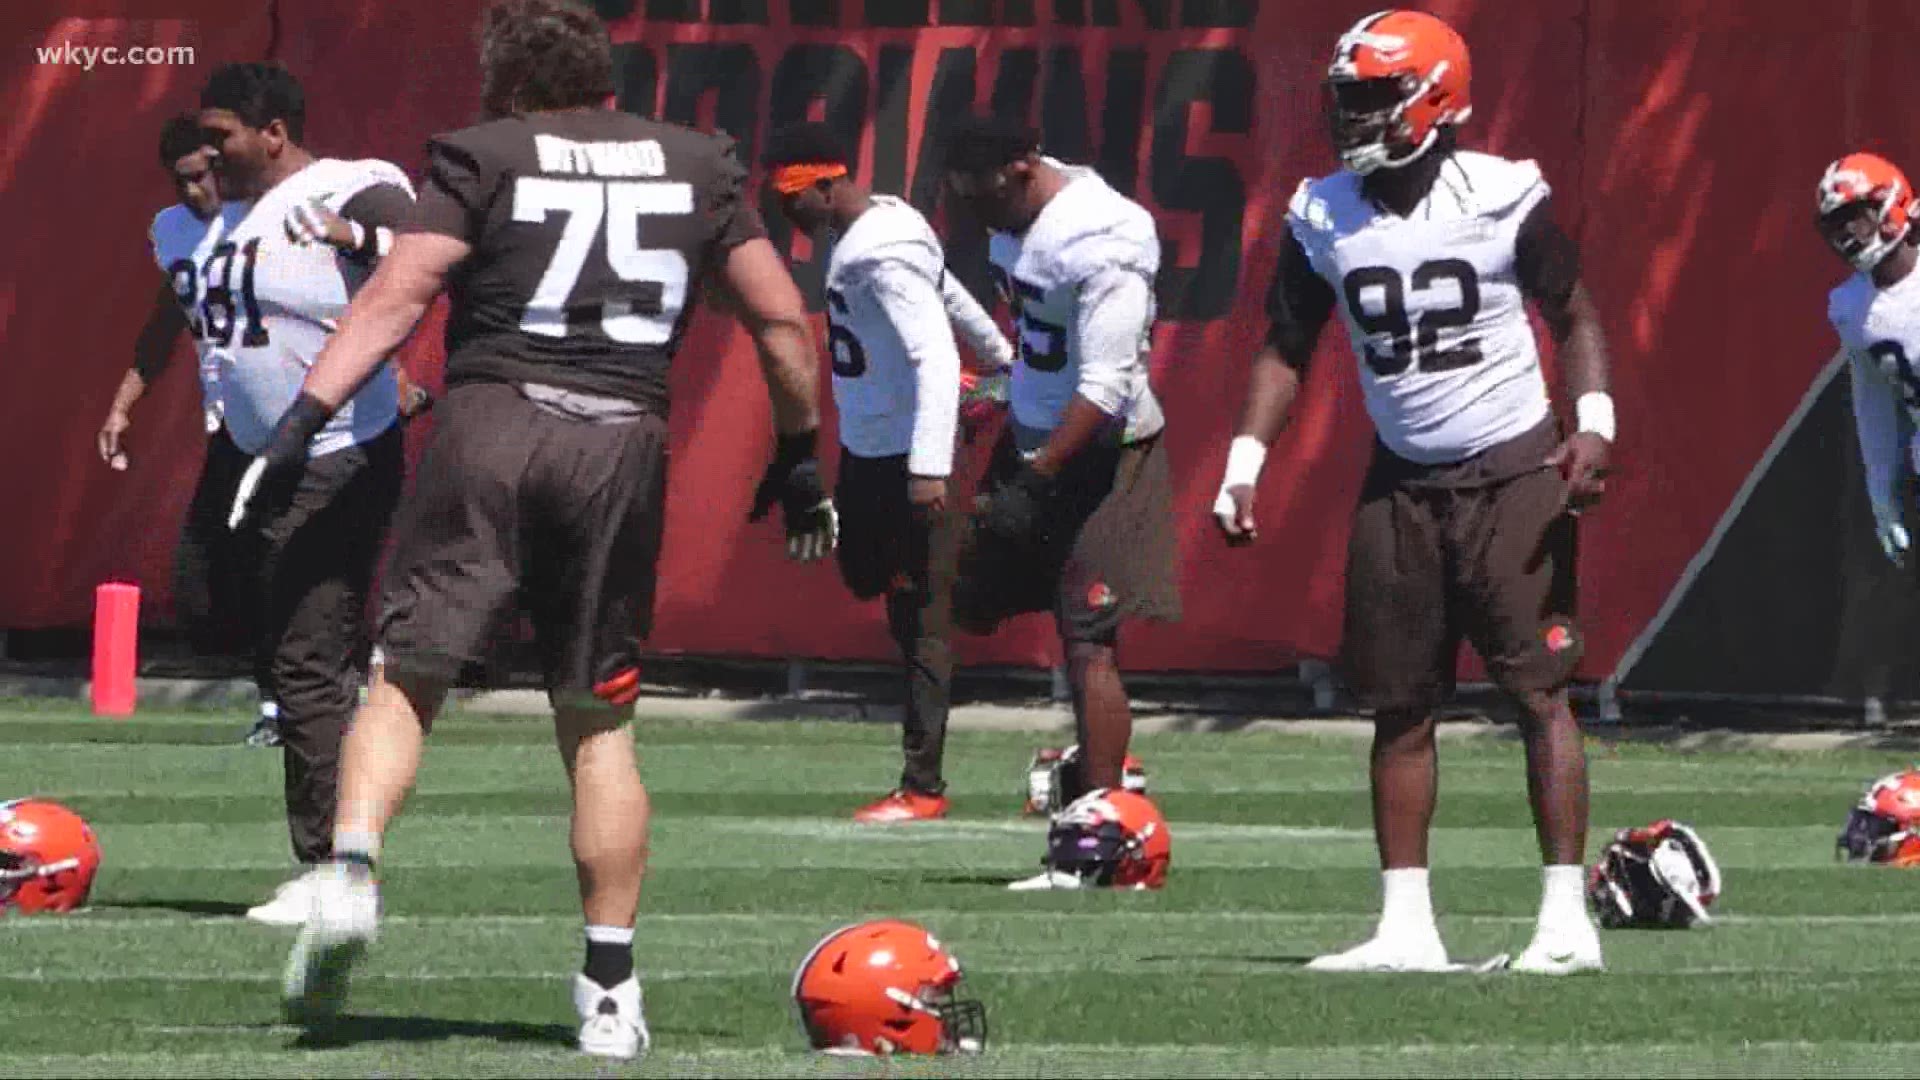 The Browns are just three weeks away from opening the regular season. The team welcomed Nick Chubb and Myles Garrett back to Saturday's practice.